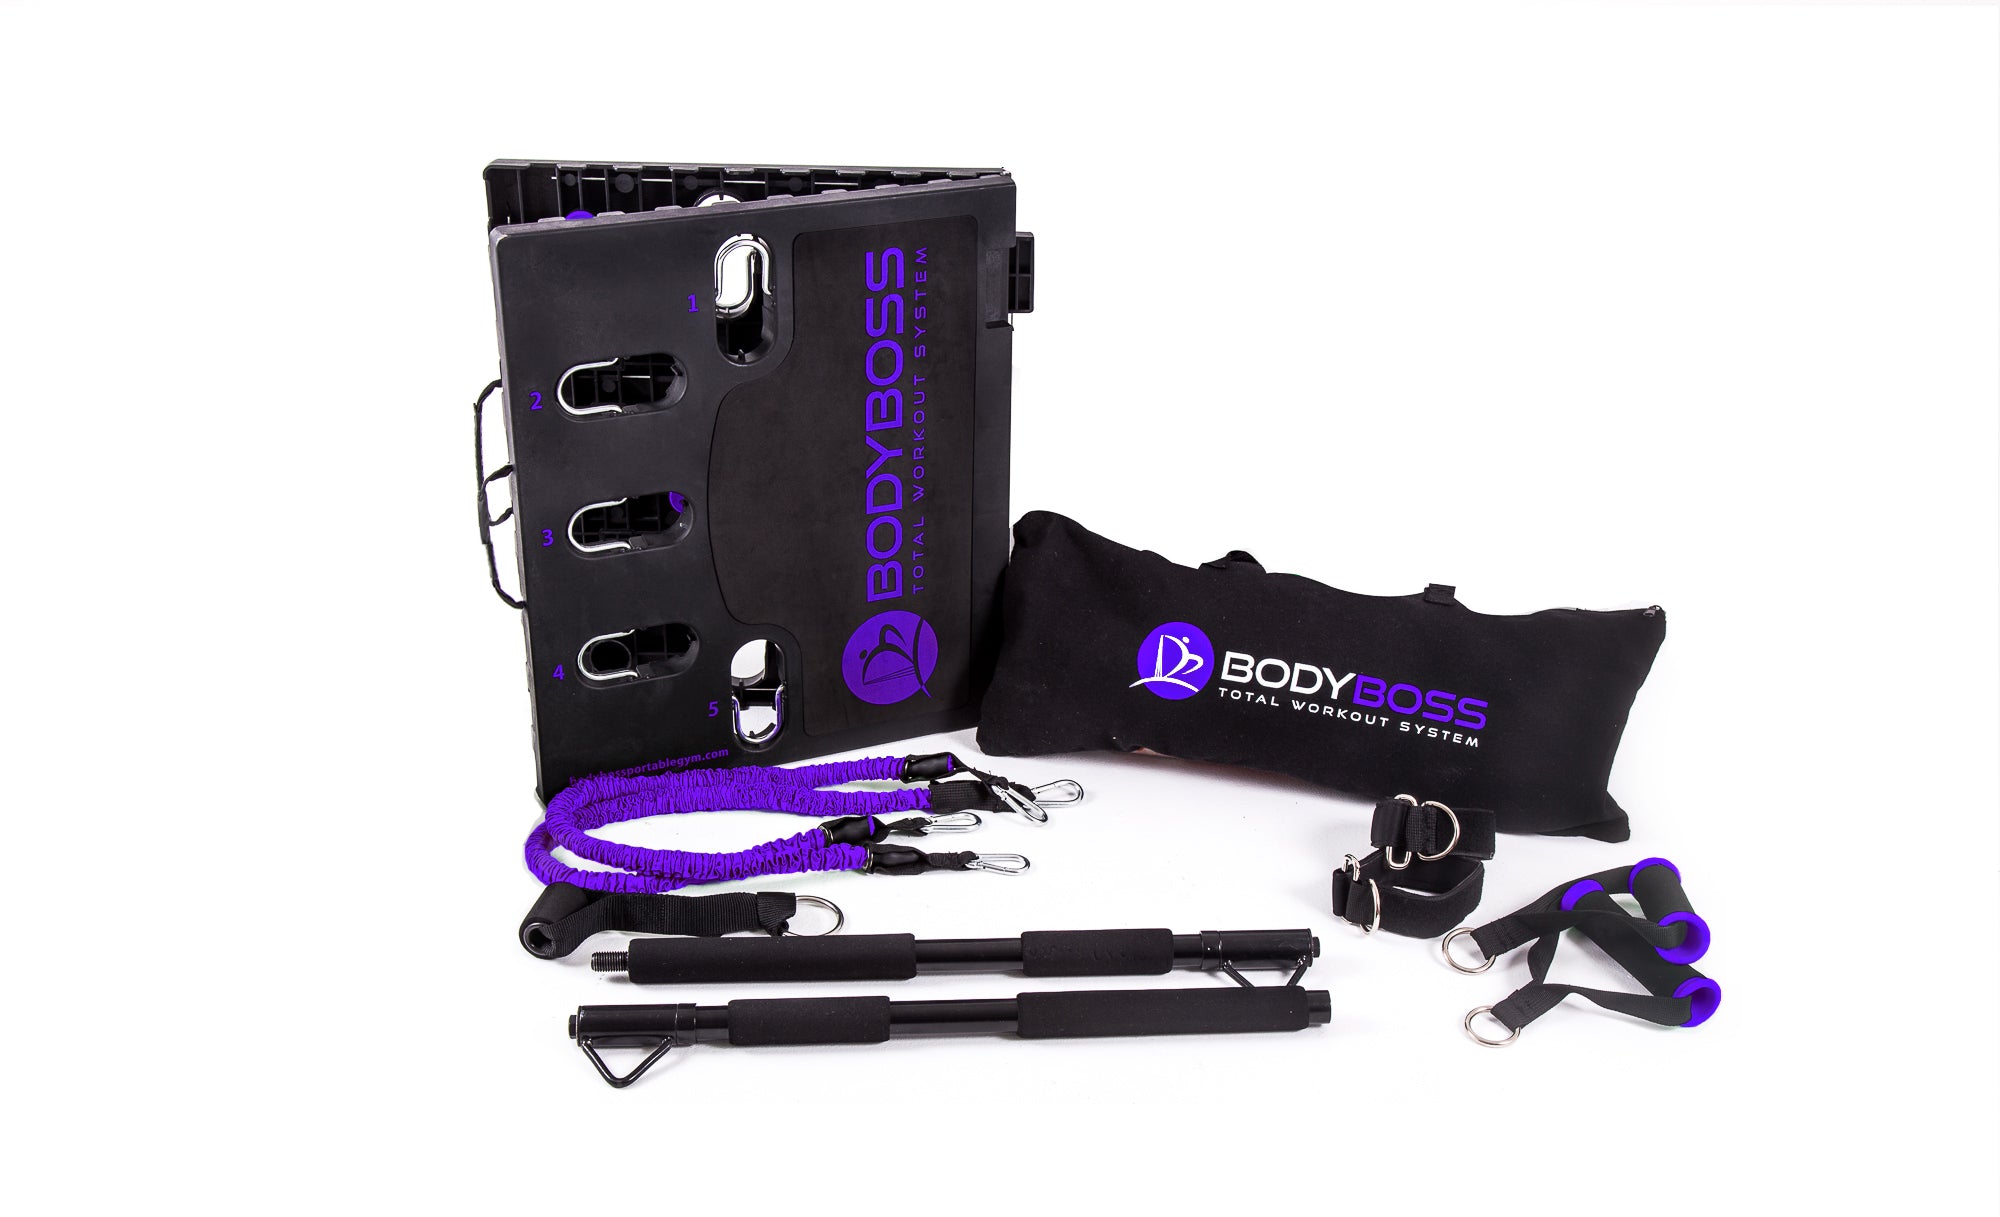 BodyBoss Home Gym 2.0 - Full Portable Gym Home Workout Package, Purple